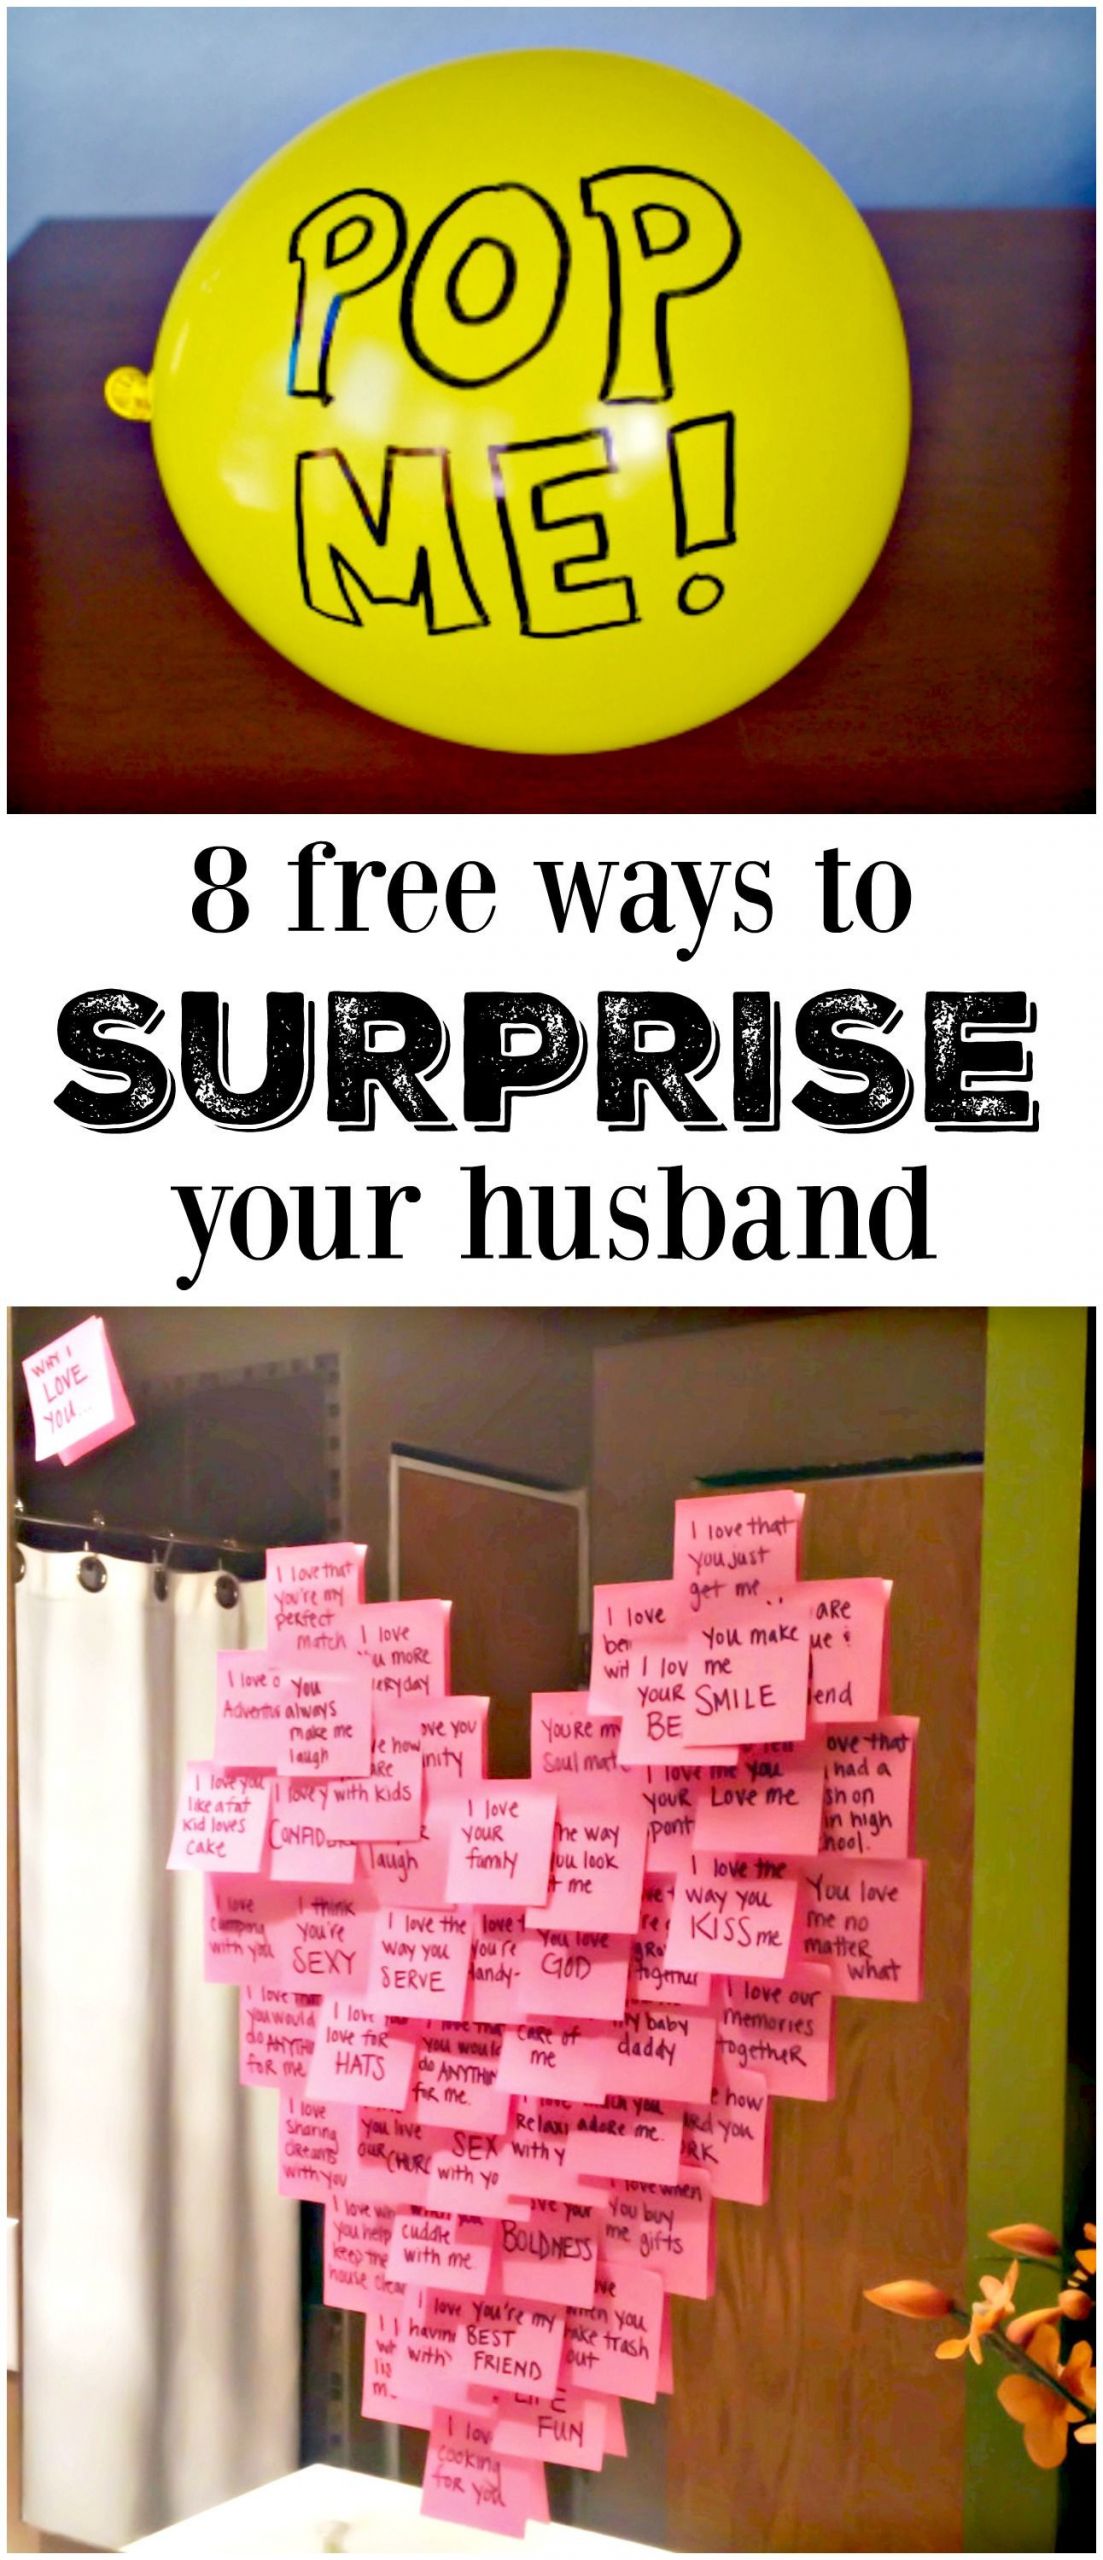 Ideas For Husbands Birthday Gift
 8 Meaningful Ways to Make His Day